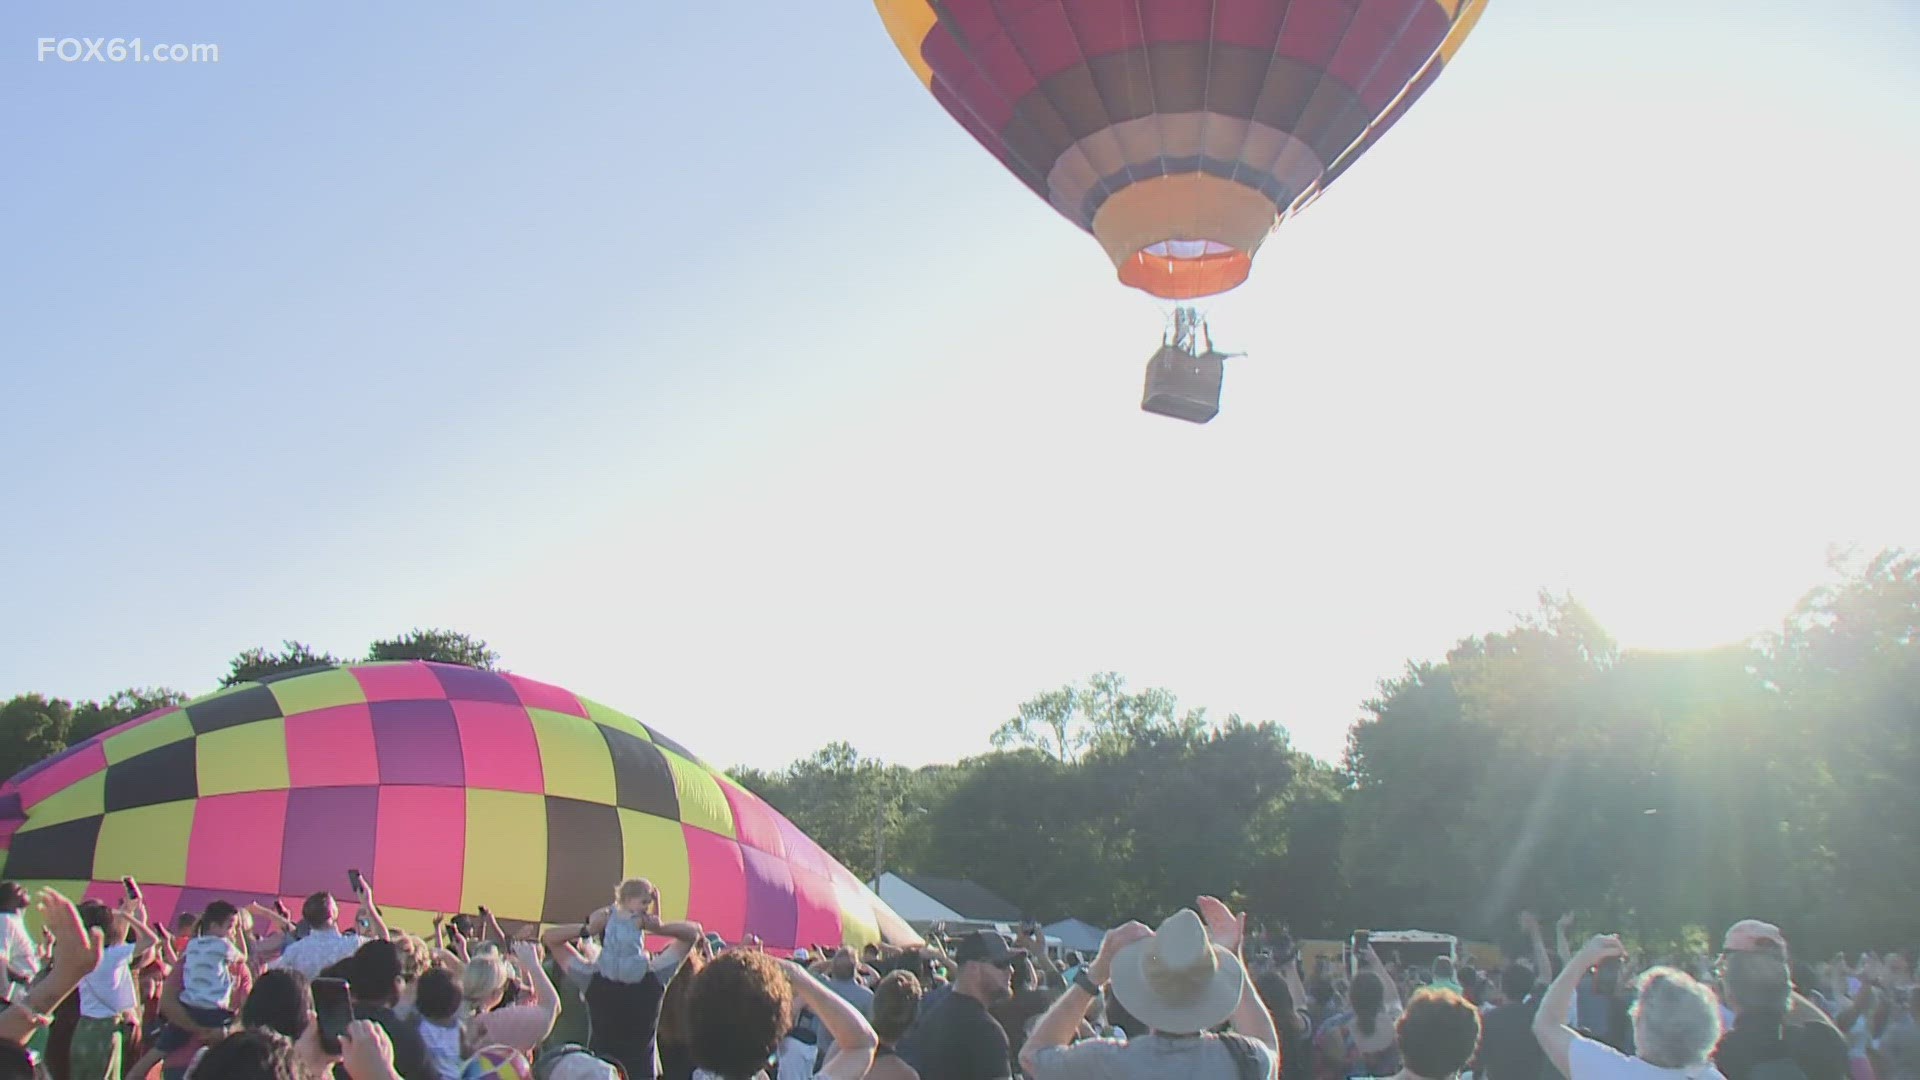 For 25 years, this event has brought thousands to the city for fun, food, and balloons, After a pandemic pause, it has returned.